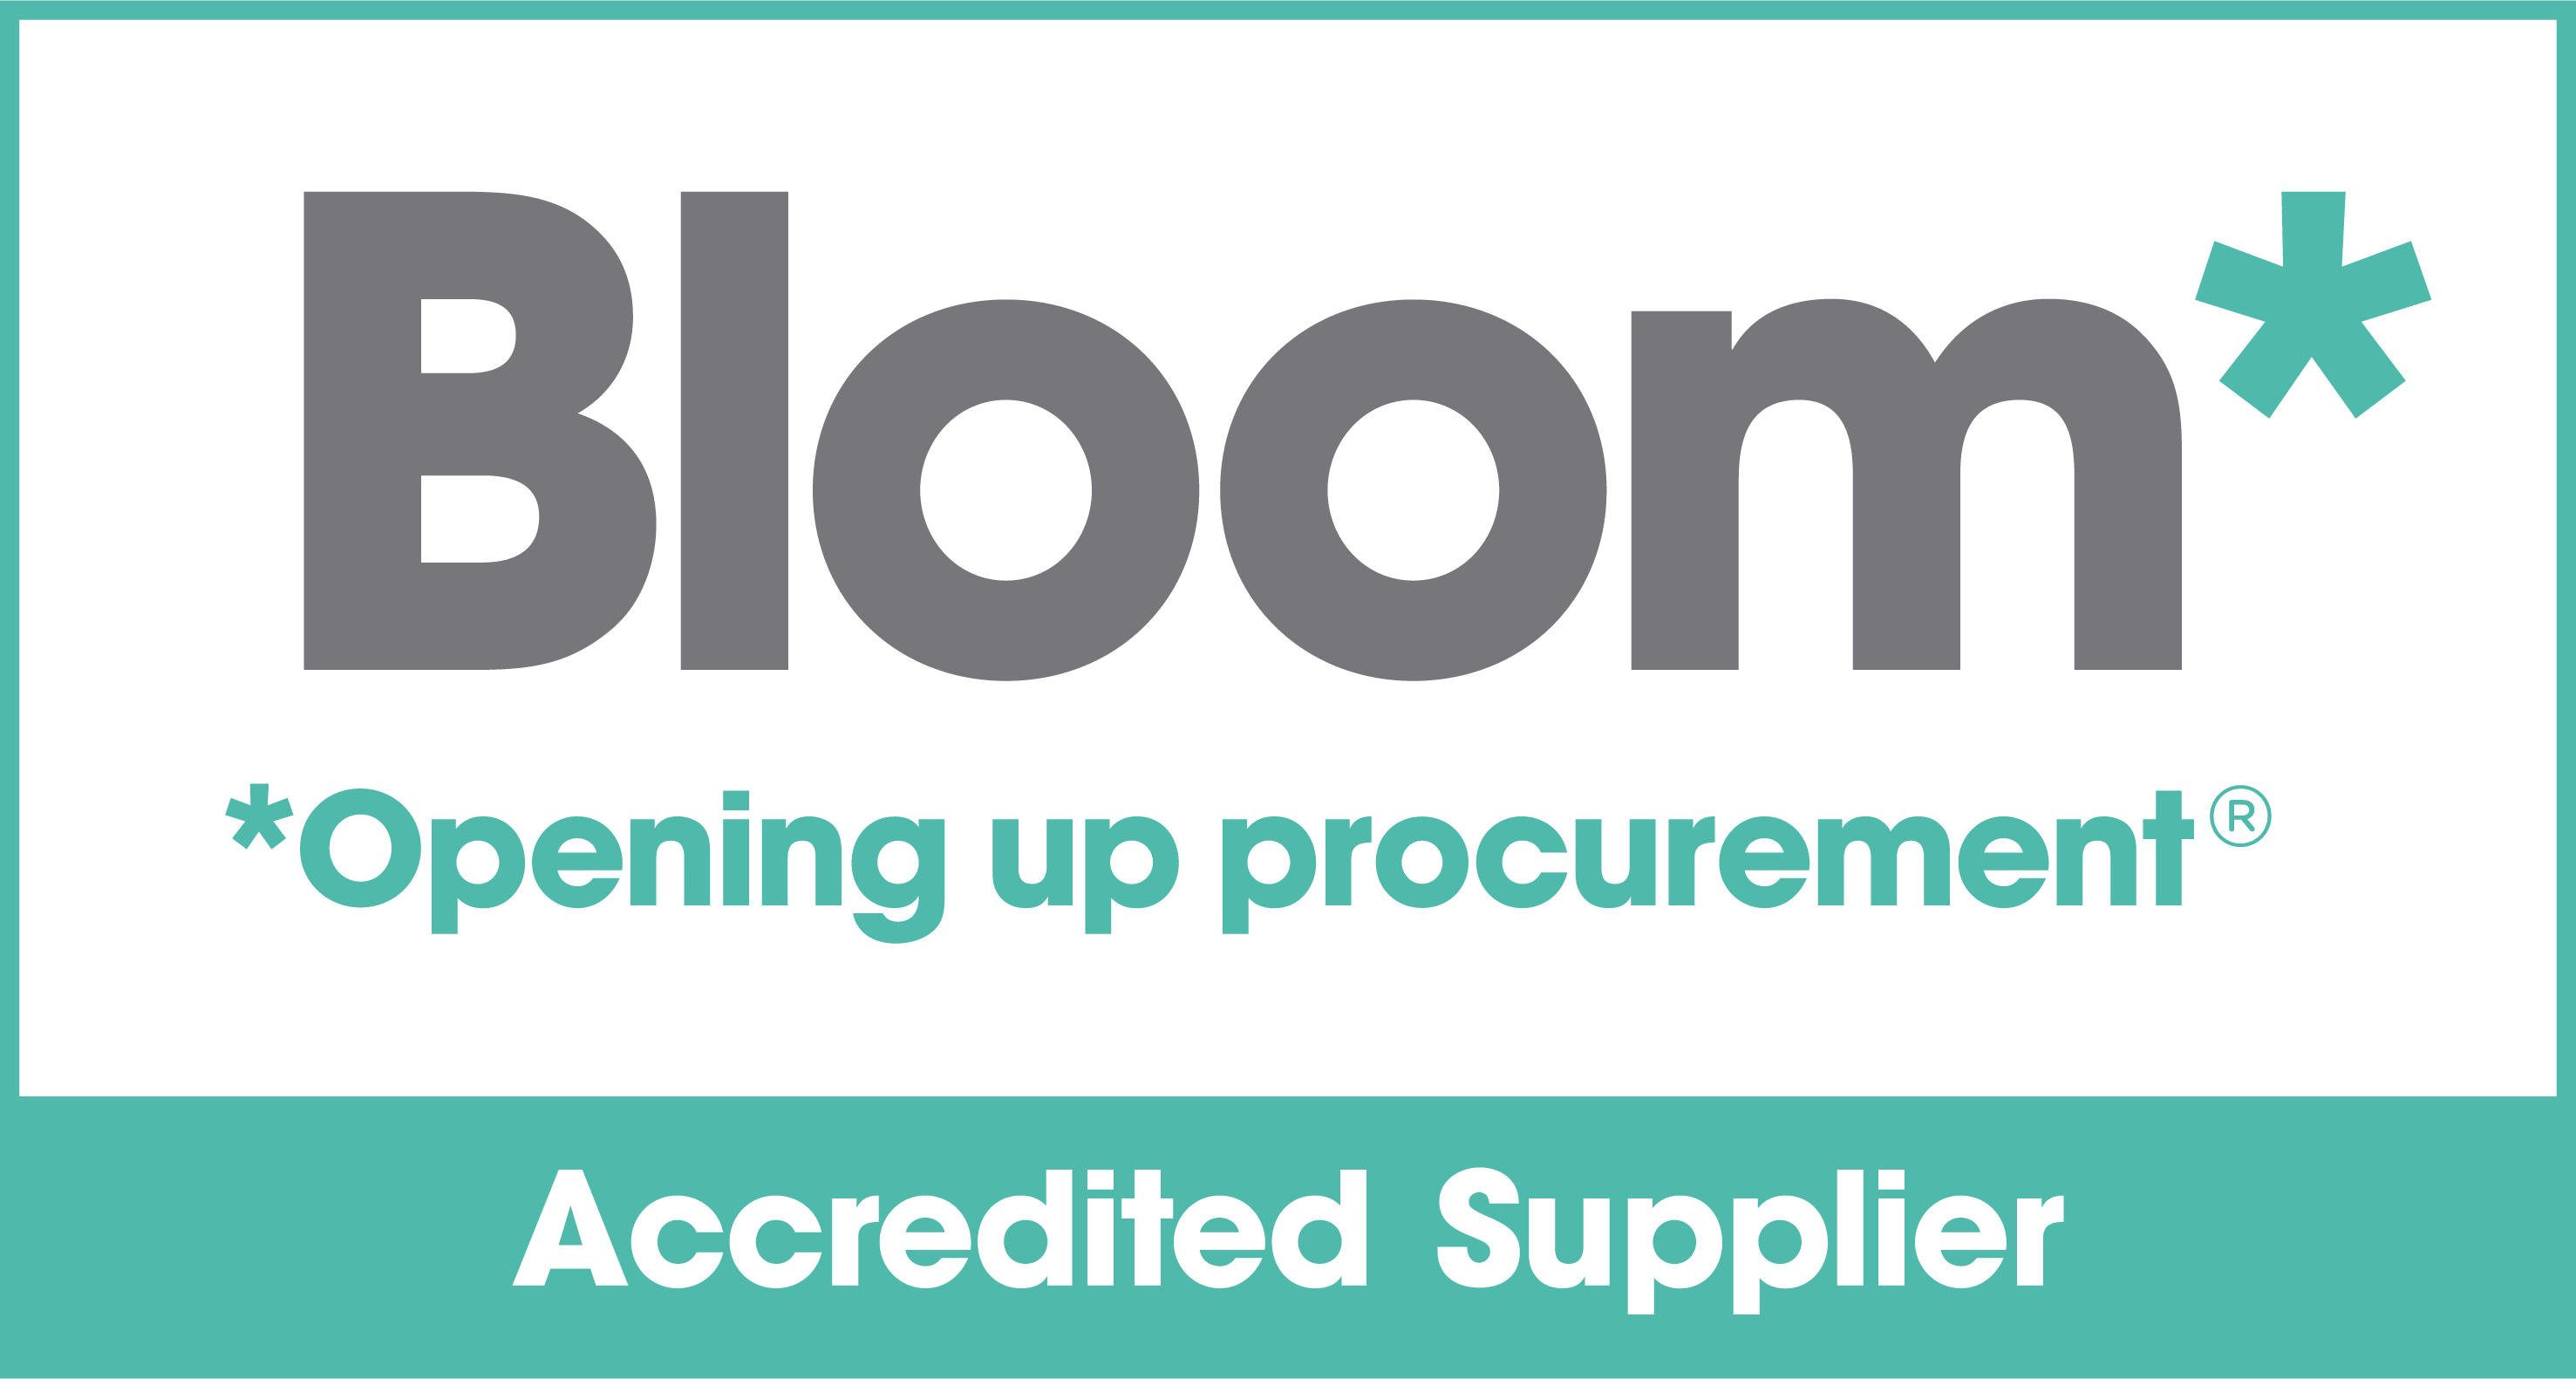 Bloom accredited supplier